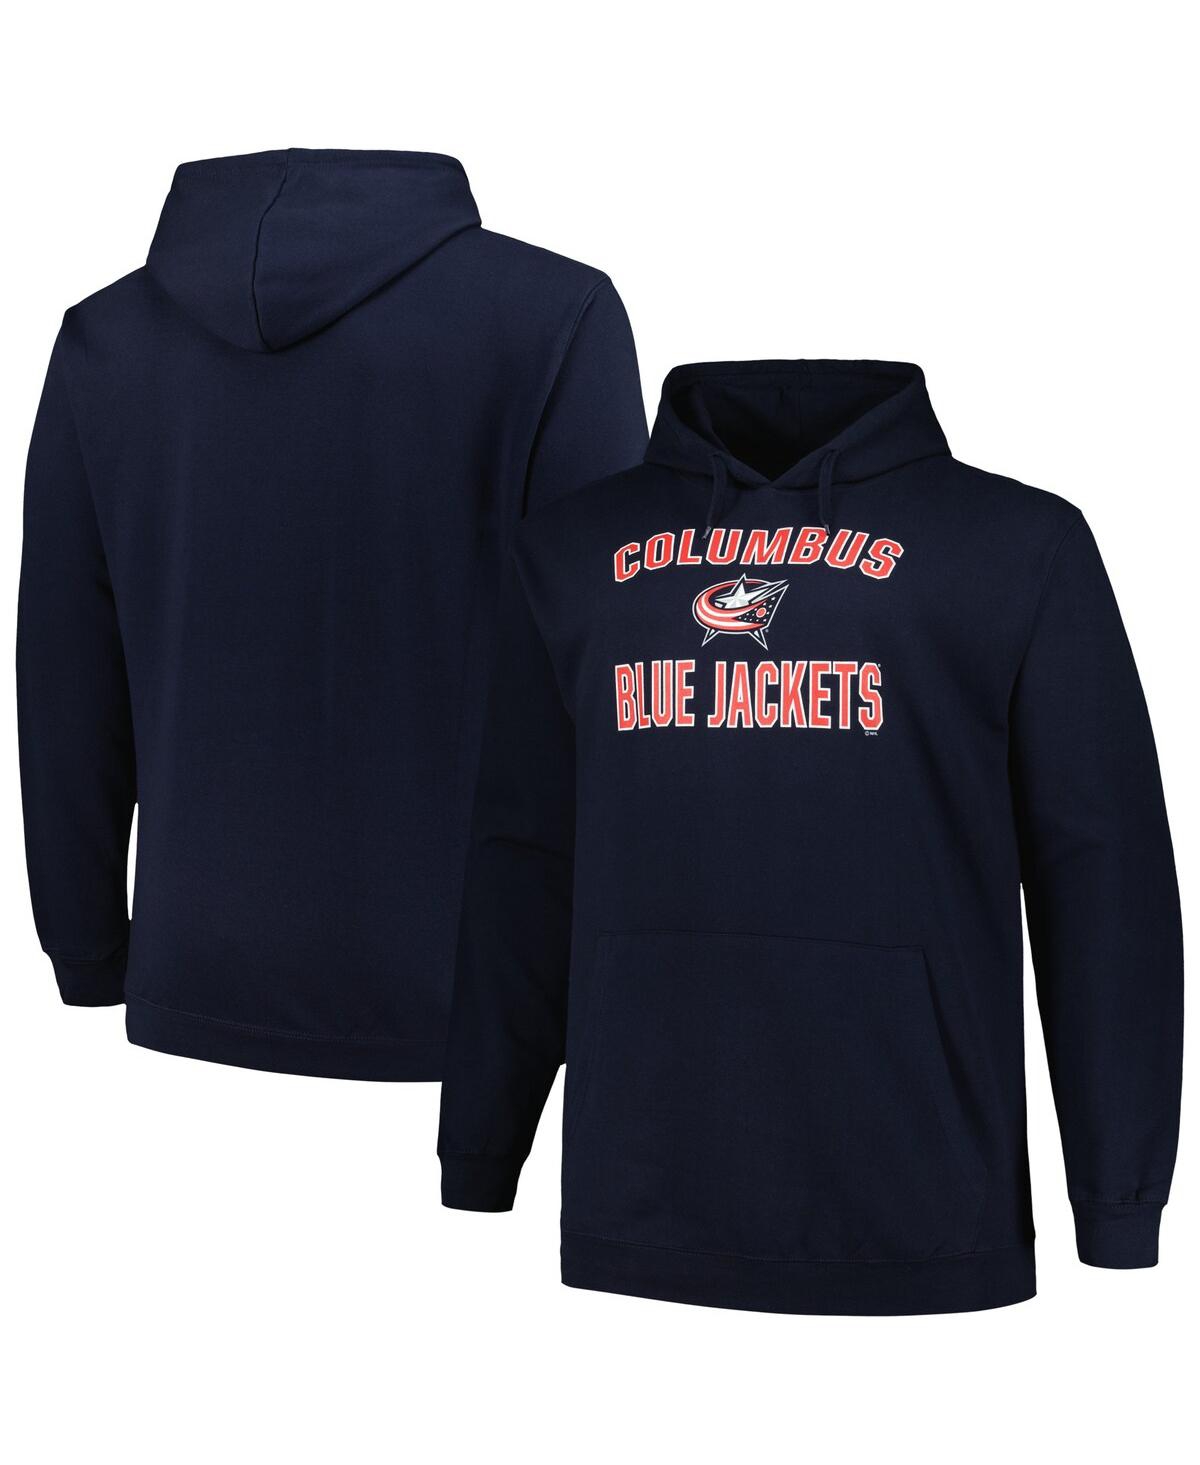 Men's Profile Navy Columbus Blue Jackets Big and Tall Arch Over Logo Pullover Hoodie - Navy